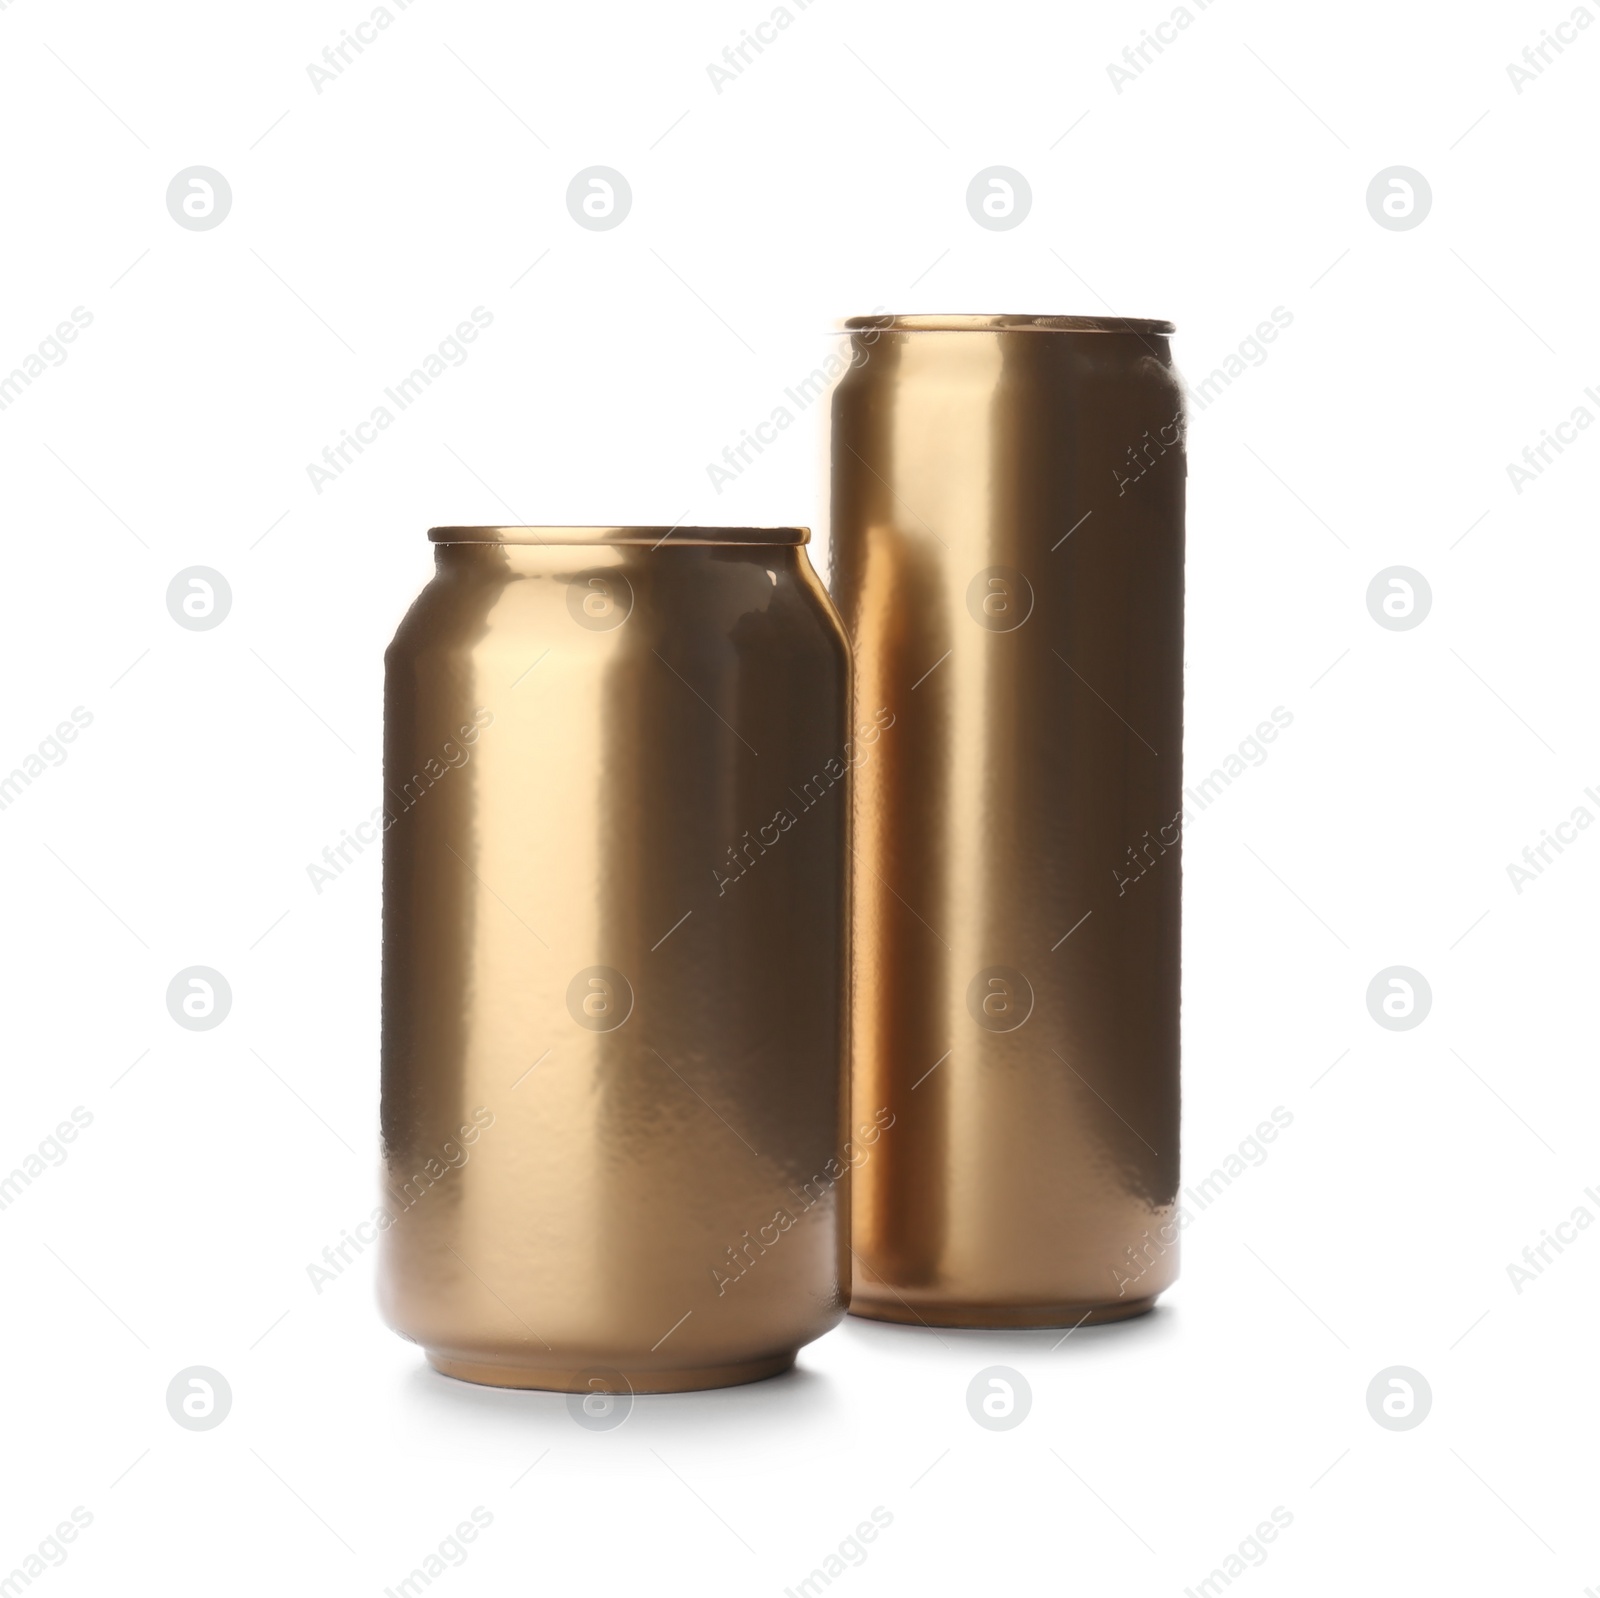 Photo of Tin cans with beverages on white background